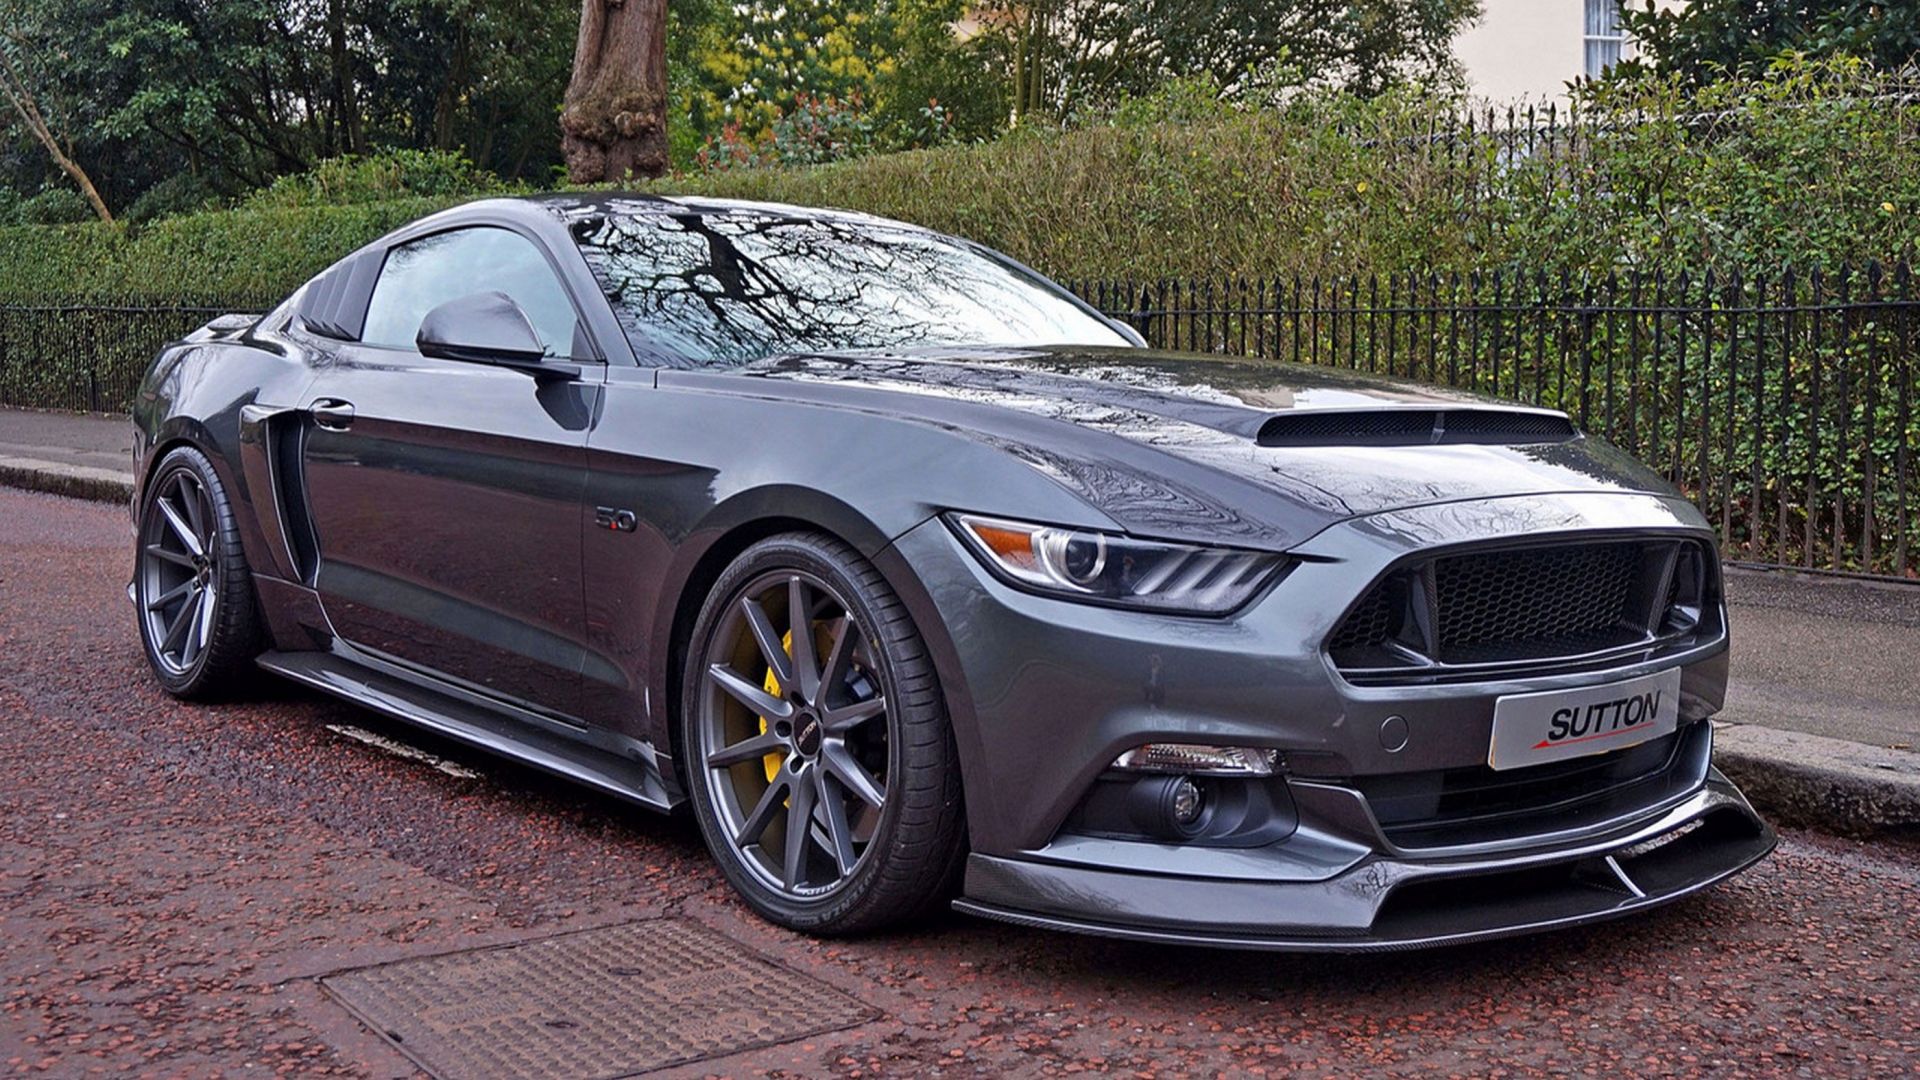 Tuning Ford Mustang by Sutton Bespoke 800 cv Made in 